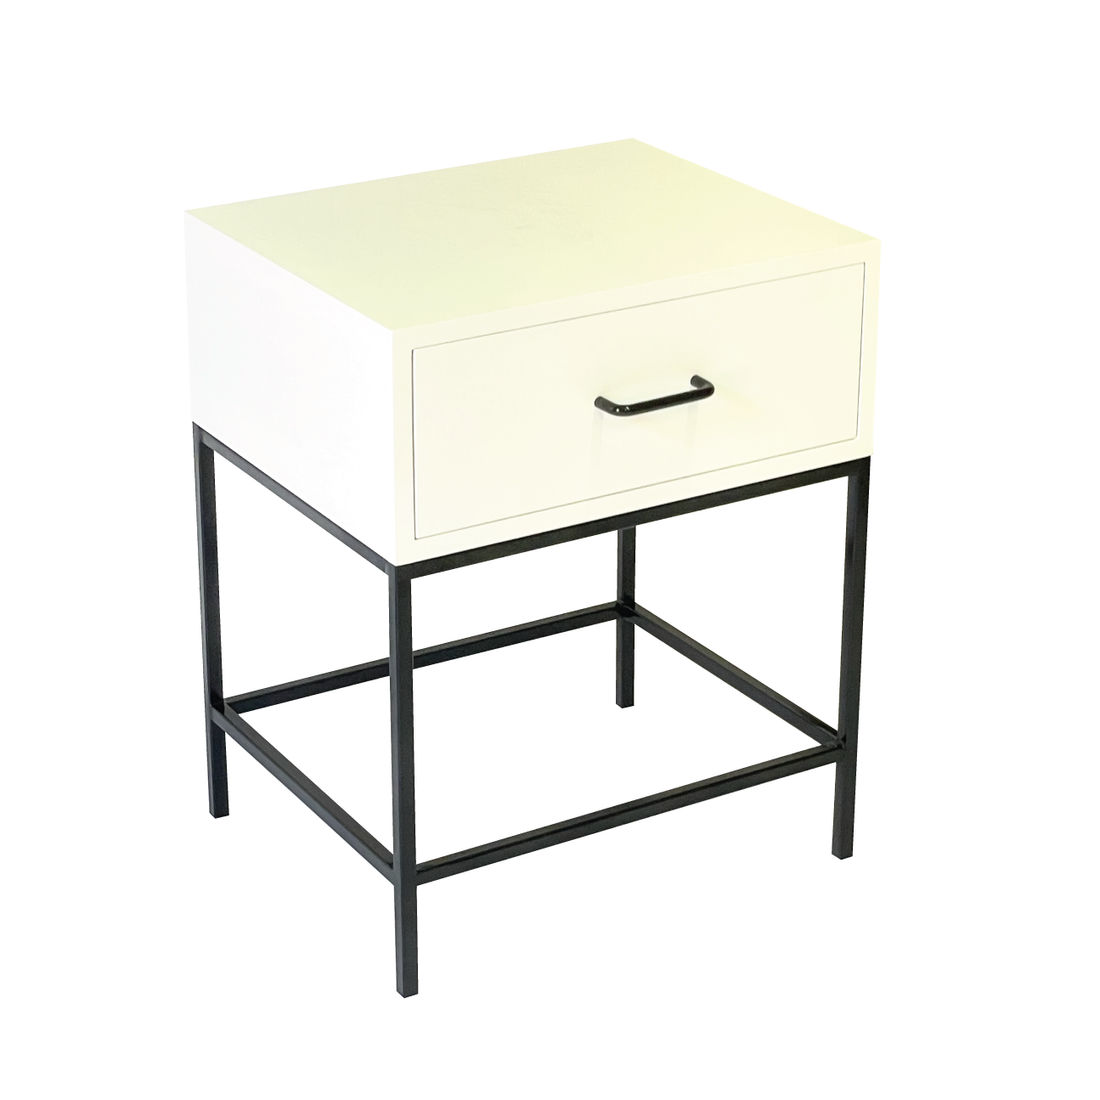 El Capitan Side Table One Drawer With Round Handles